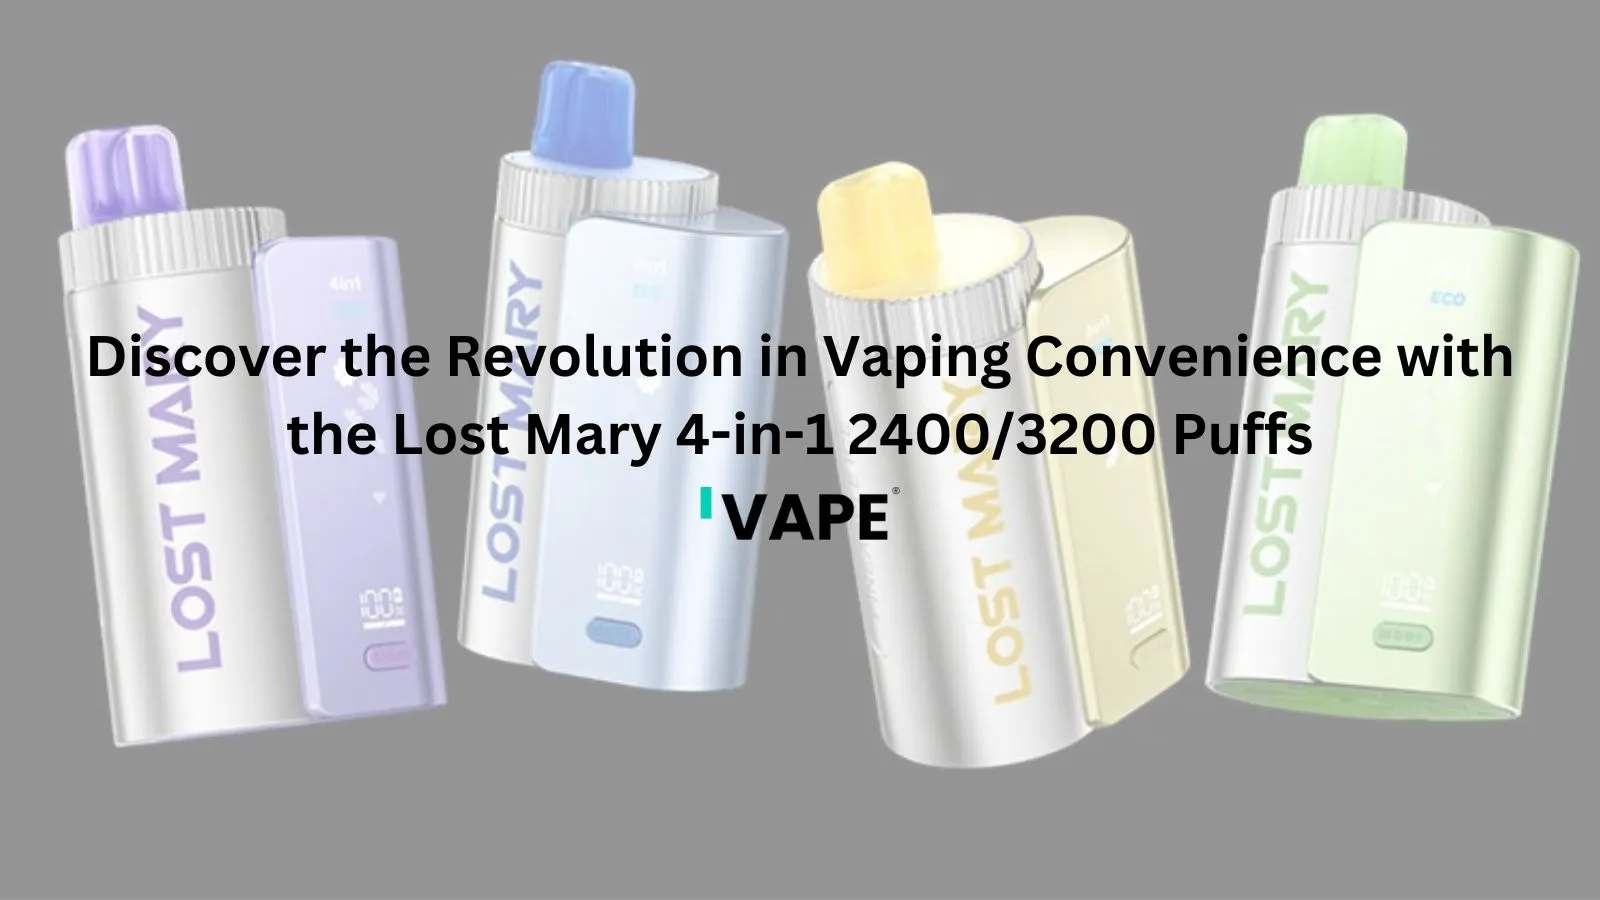 Discover the Revolution in Vaping Convenience with the Lost Mary 4-in-1 2400/3200 Puffs 